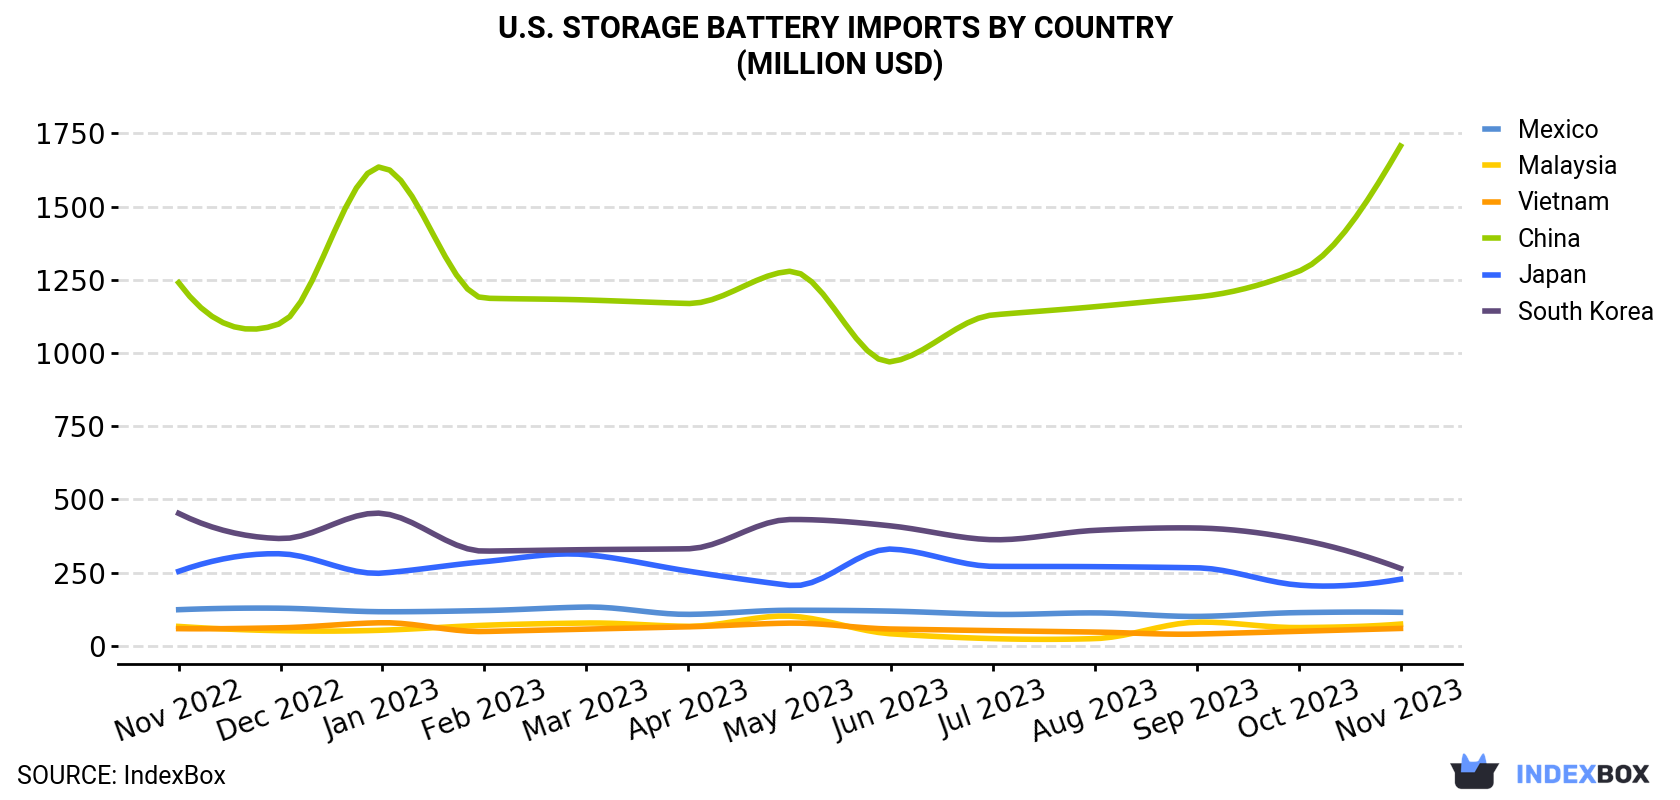 U.S. Storage Battery Imports By Country (Million USD)